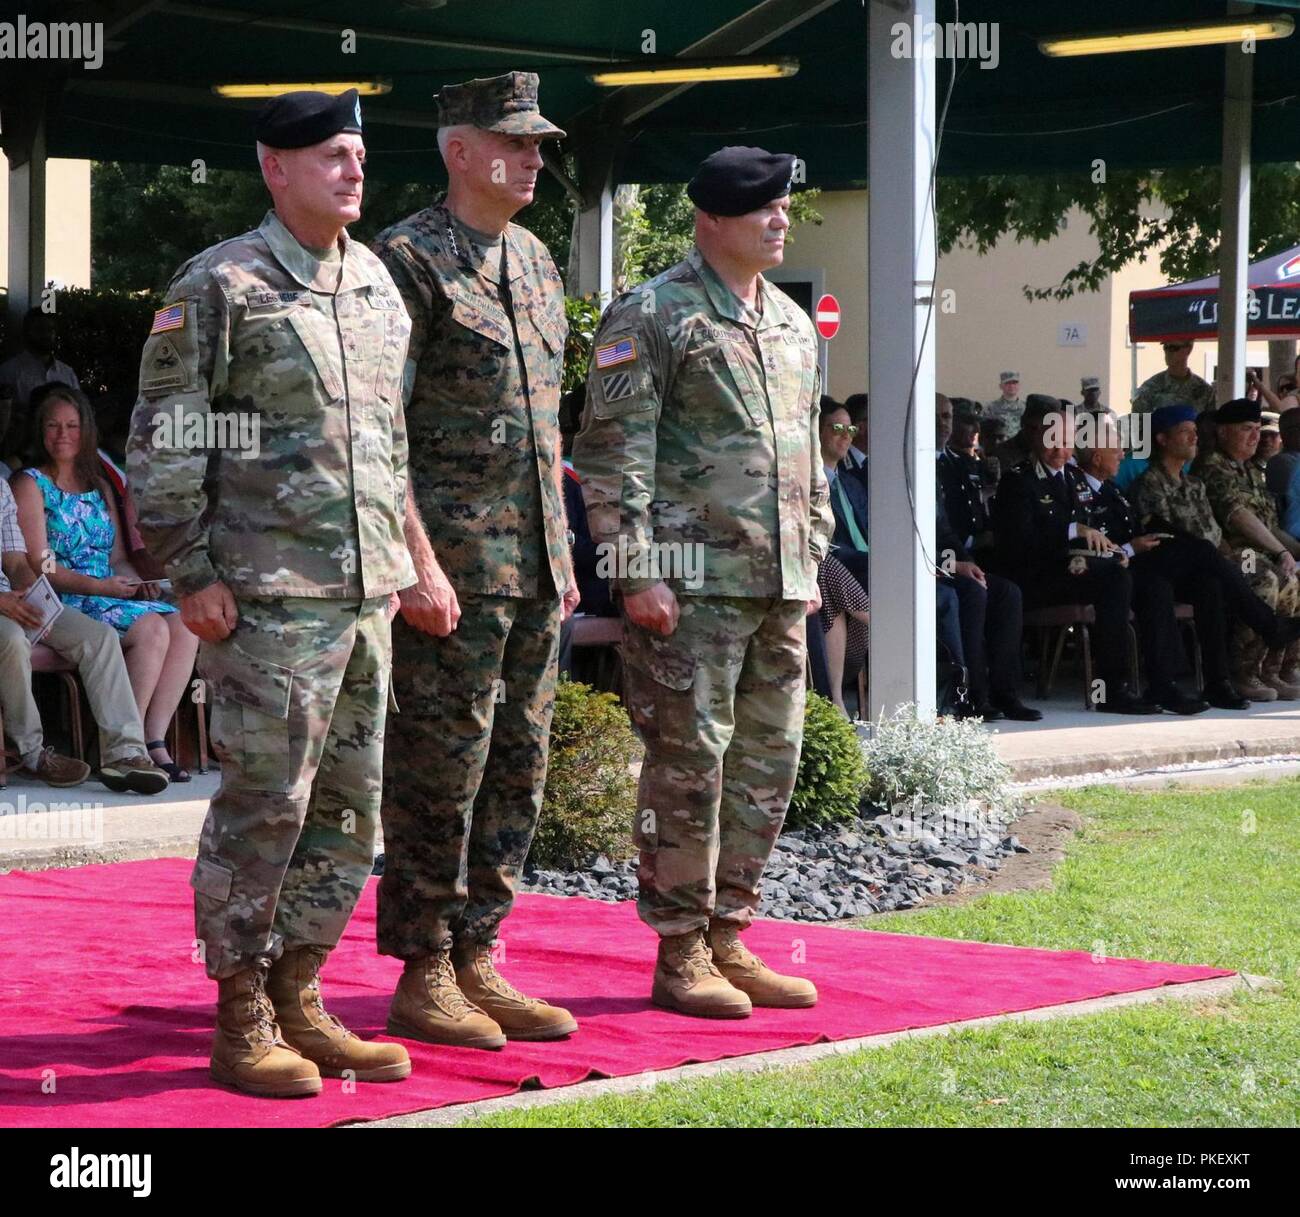 Brig. Gen. Eugene J. LeBoeuf, left, the outgoing U.S. Army Africa acting commanding general; Marine Gen. Thomas D. Waldhauser, center, the U.S. Africa Command commanding general; and Maj. Gen. Roger L. Cloutier, the incoming U.S. Army Africa commanding general, prepare for the passing of the guidon during the USARAF change of command ceremony, held at Caserma Ederle in Vicenza, Italy, Aug. 2, 2018. Stock Photo